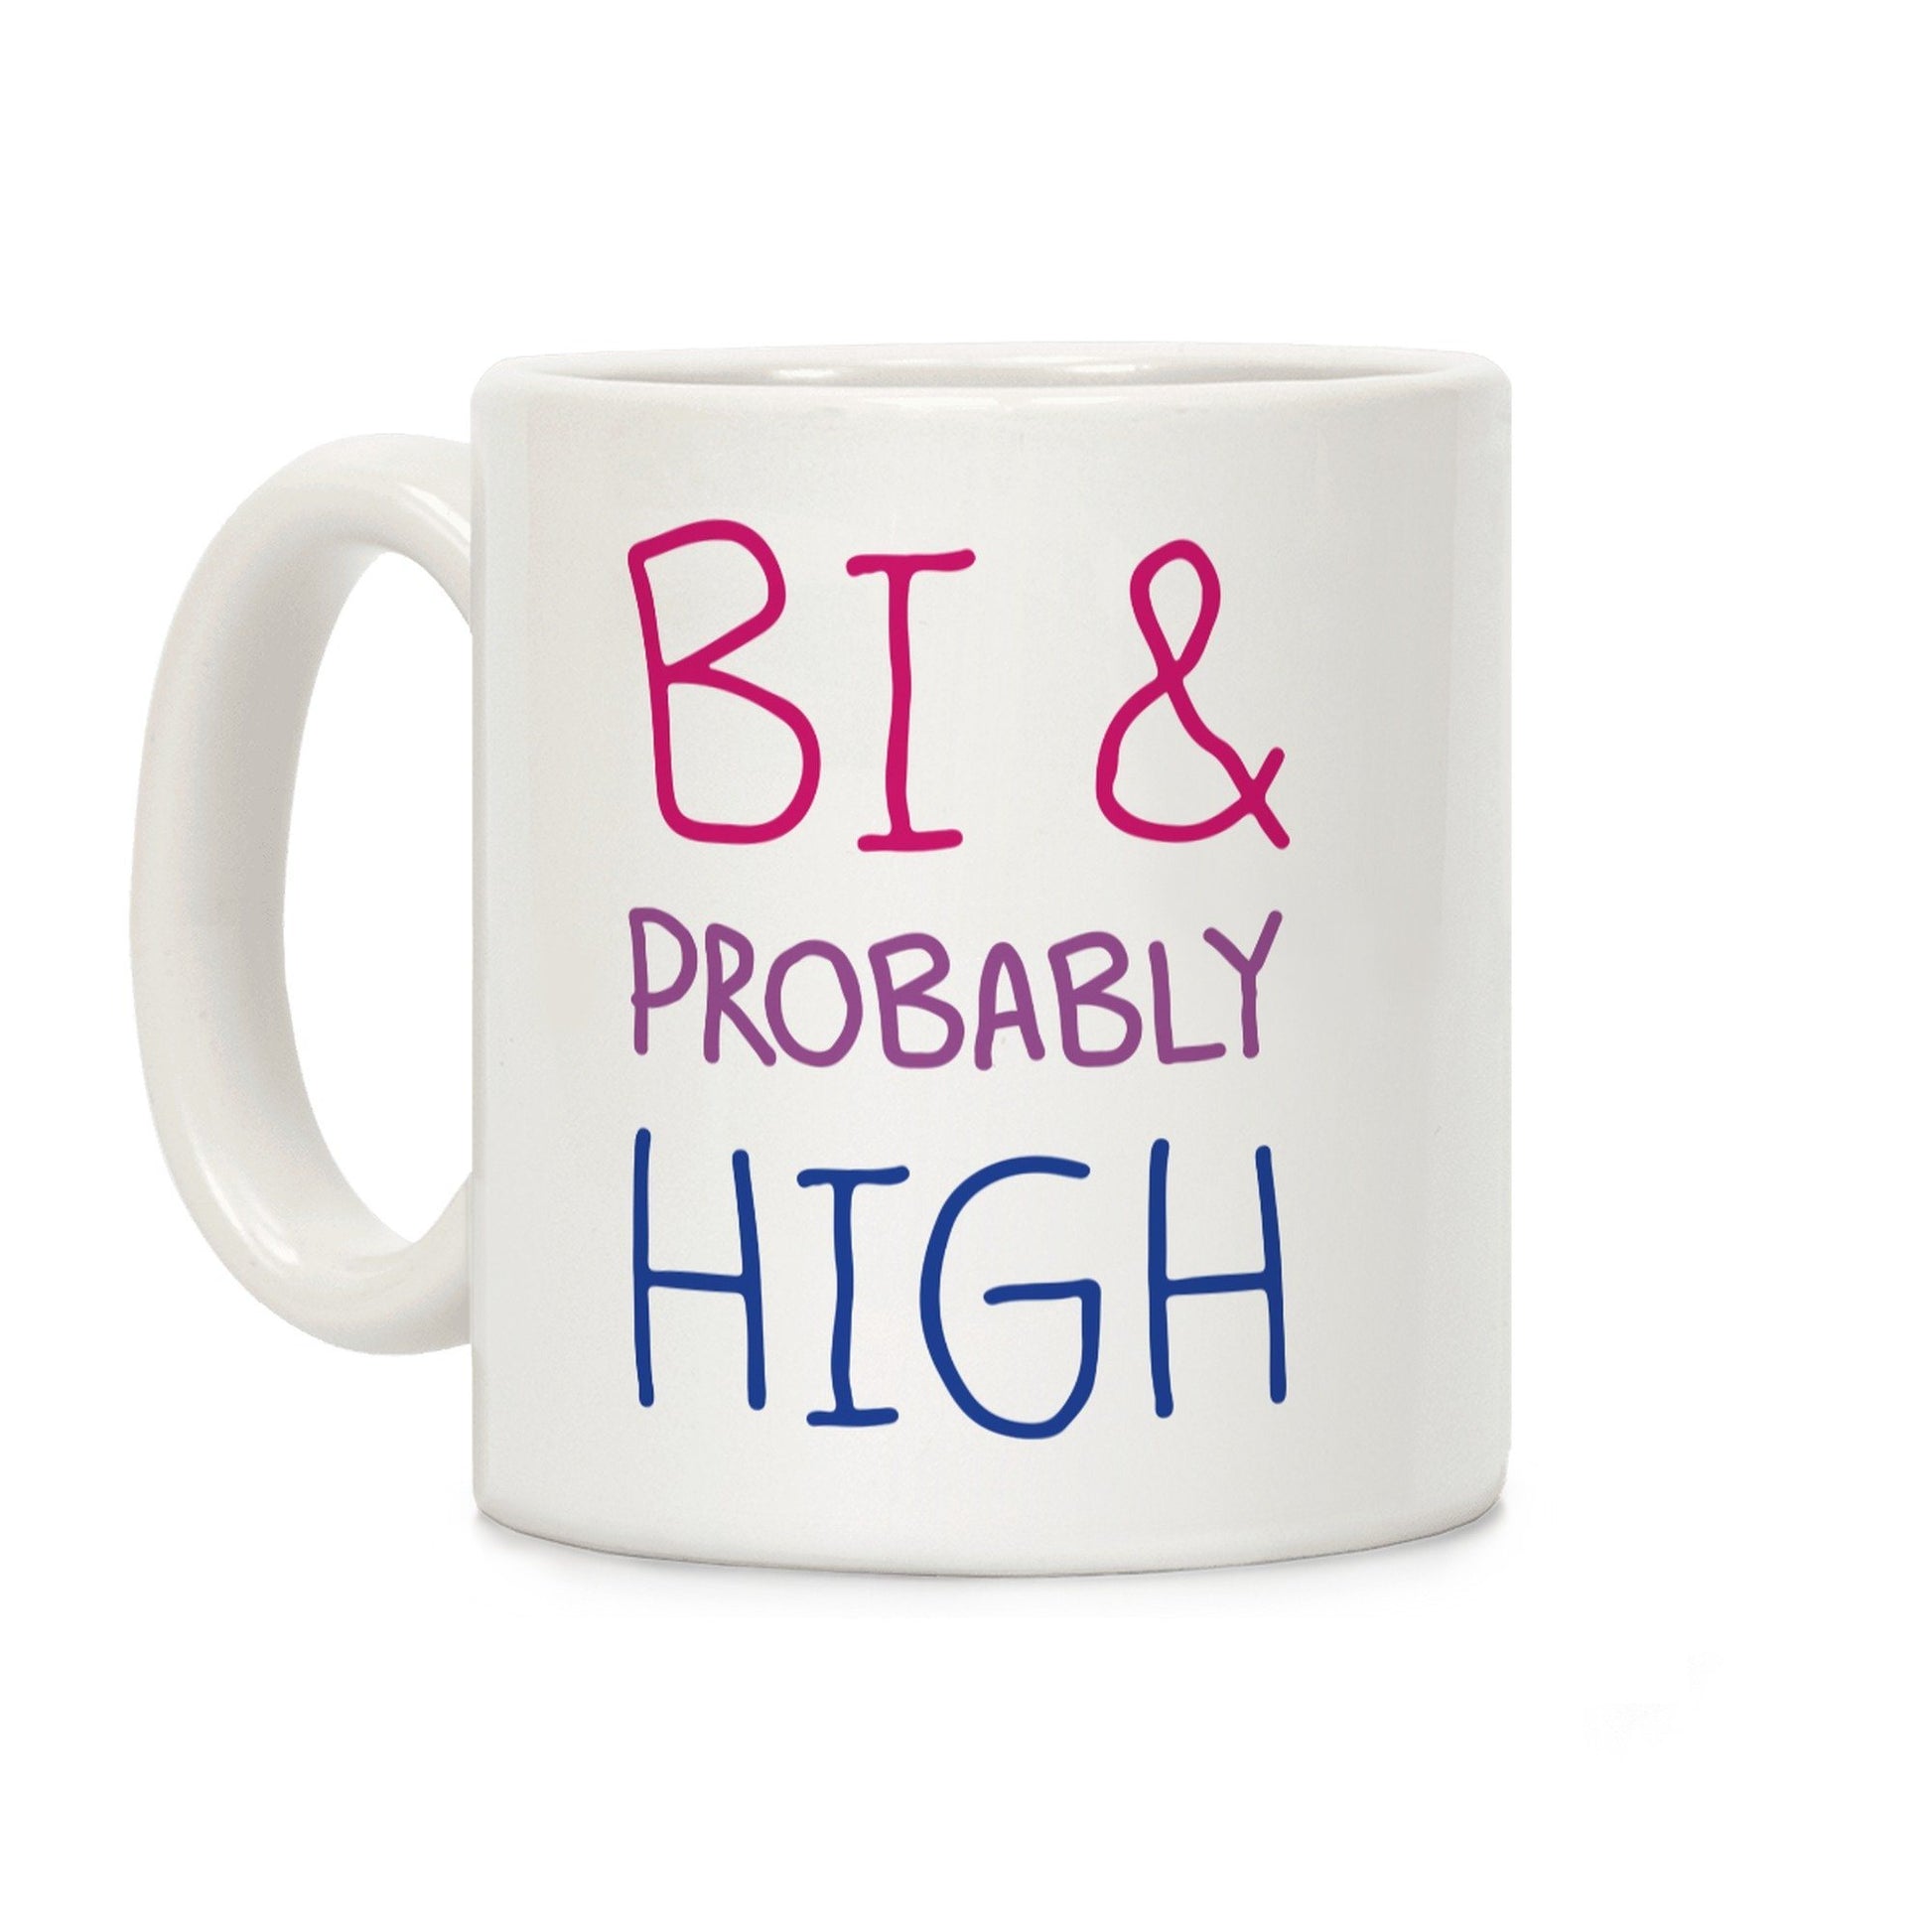 Bi And Probably High Ceramic Coffee Mug by LookHUMAN Flower Power Packages 11 Ounce 